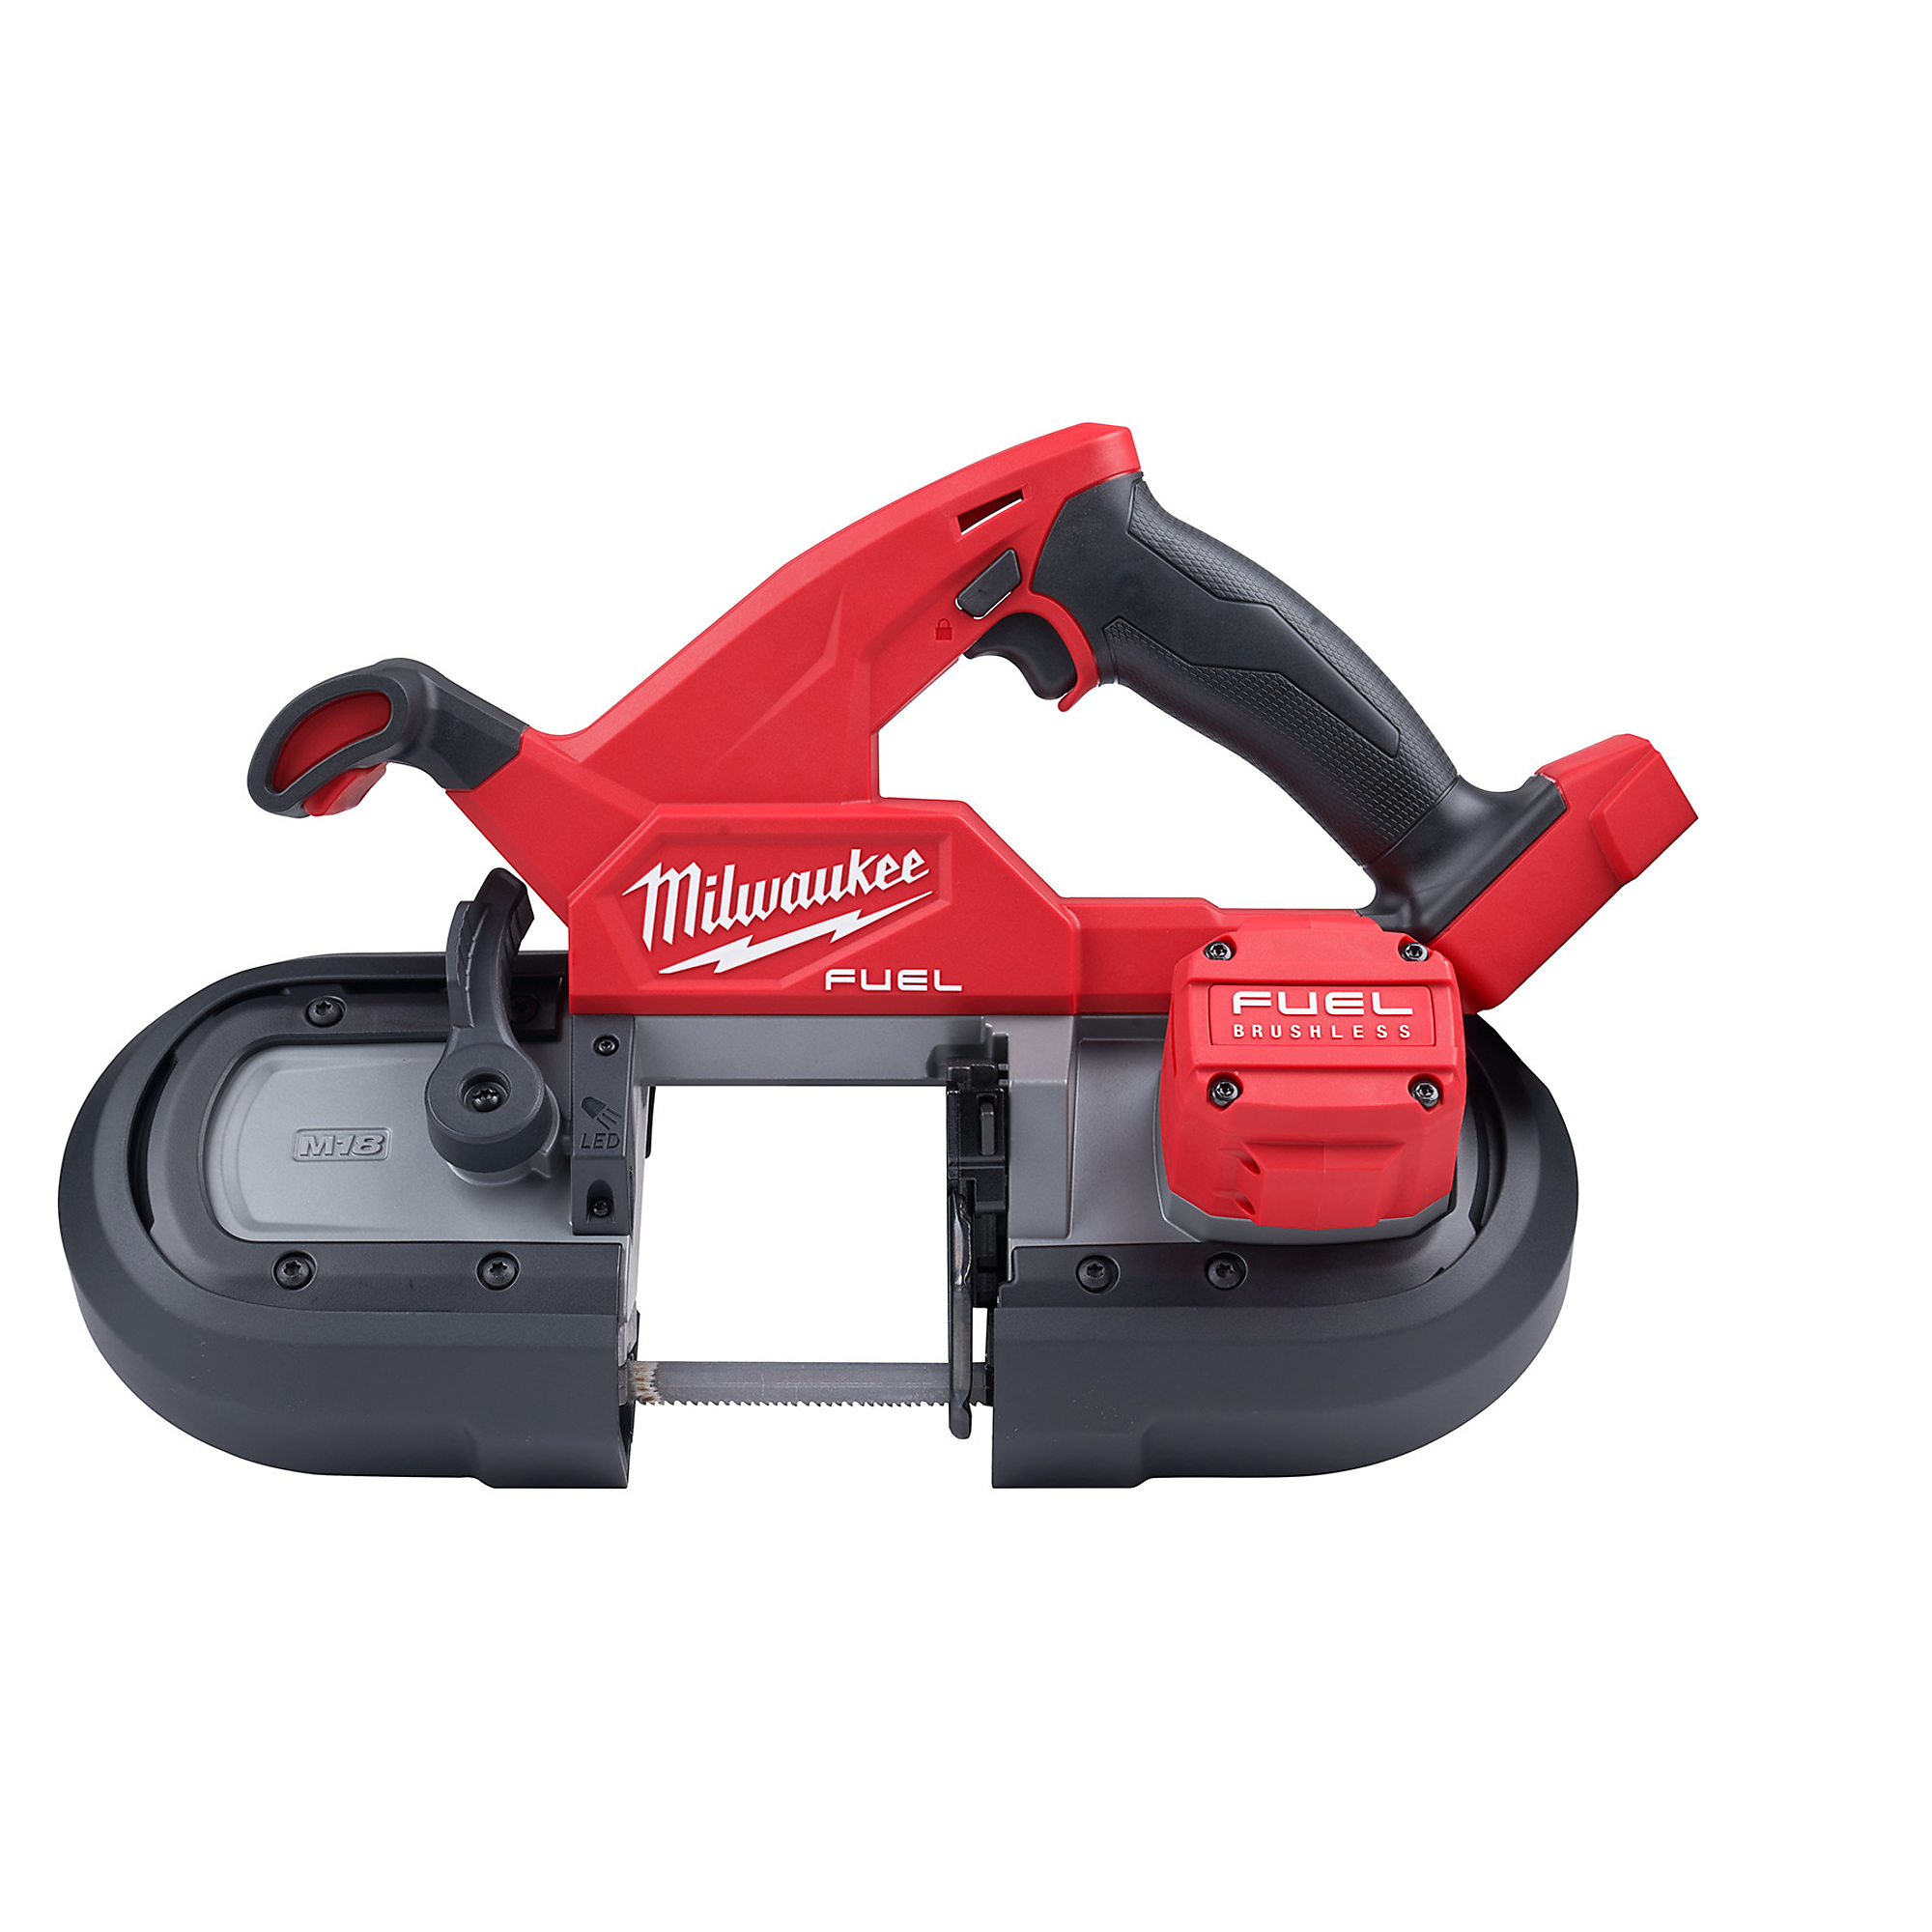 Milwaukee, M18 FUEL Compact Dual-Trigger Band Saw (Tool-Only), Volts 18, Power Type Battery, Model 2829S-20